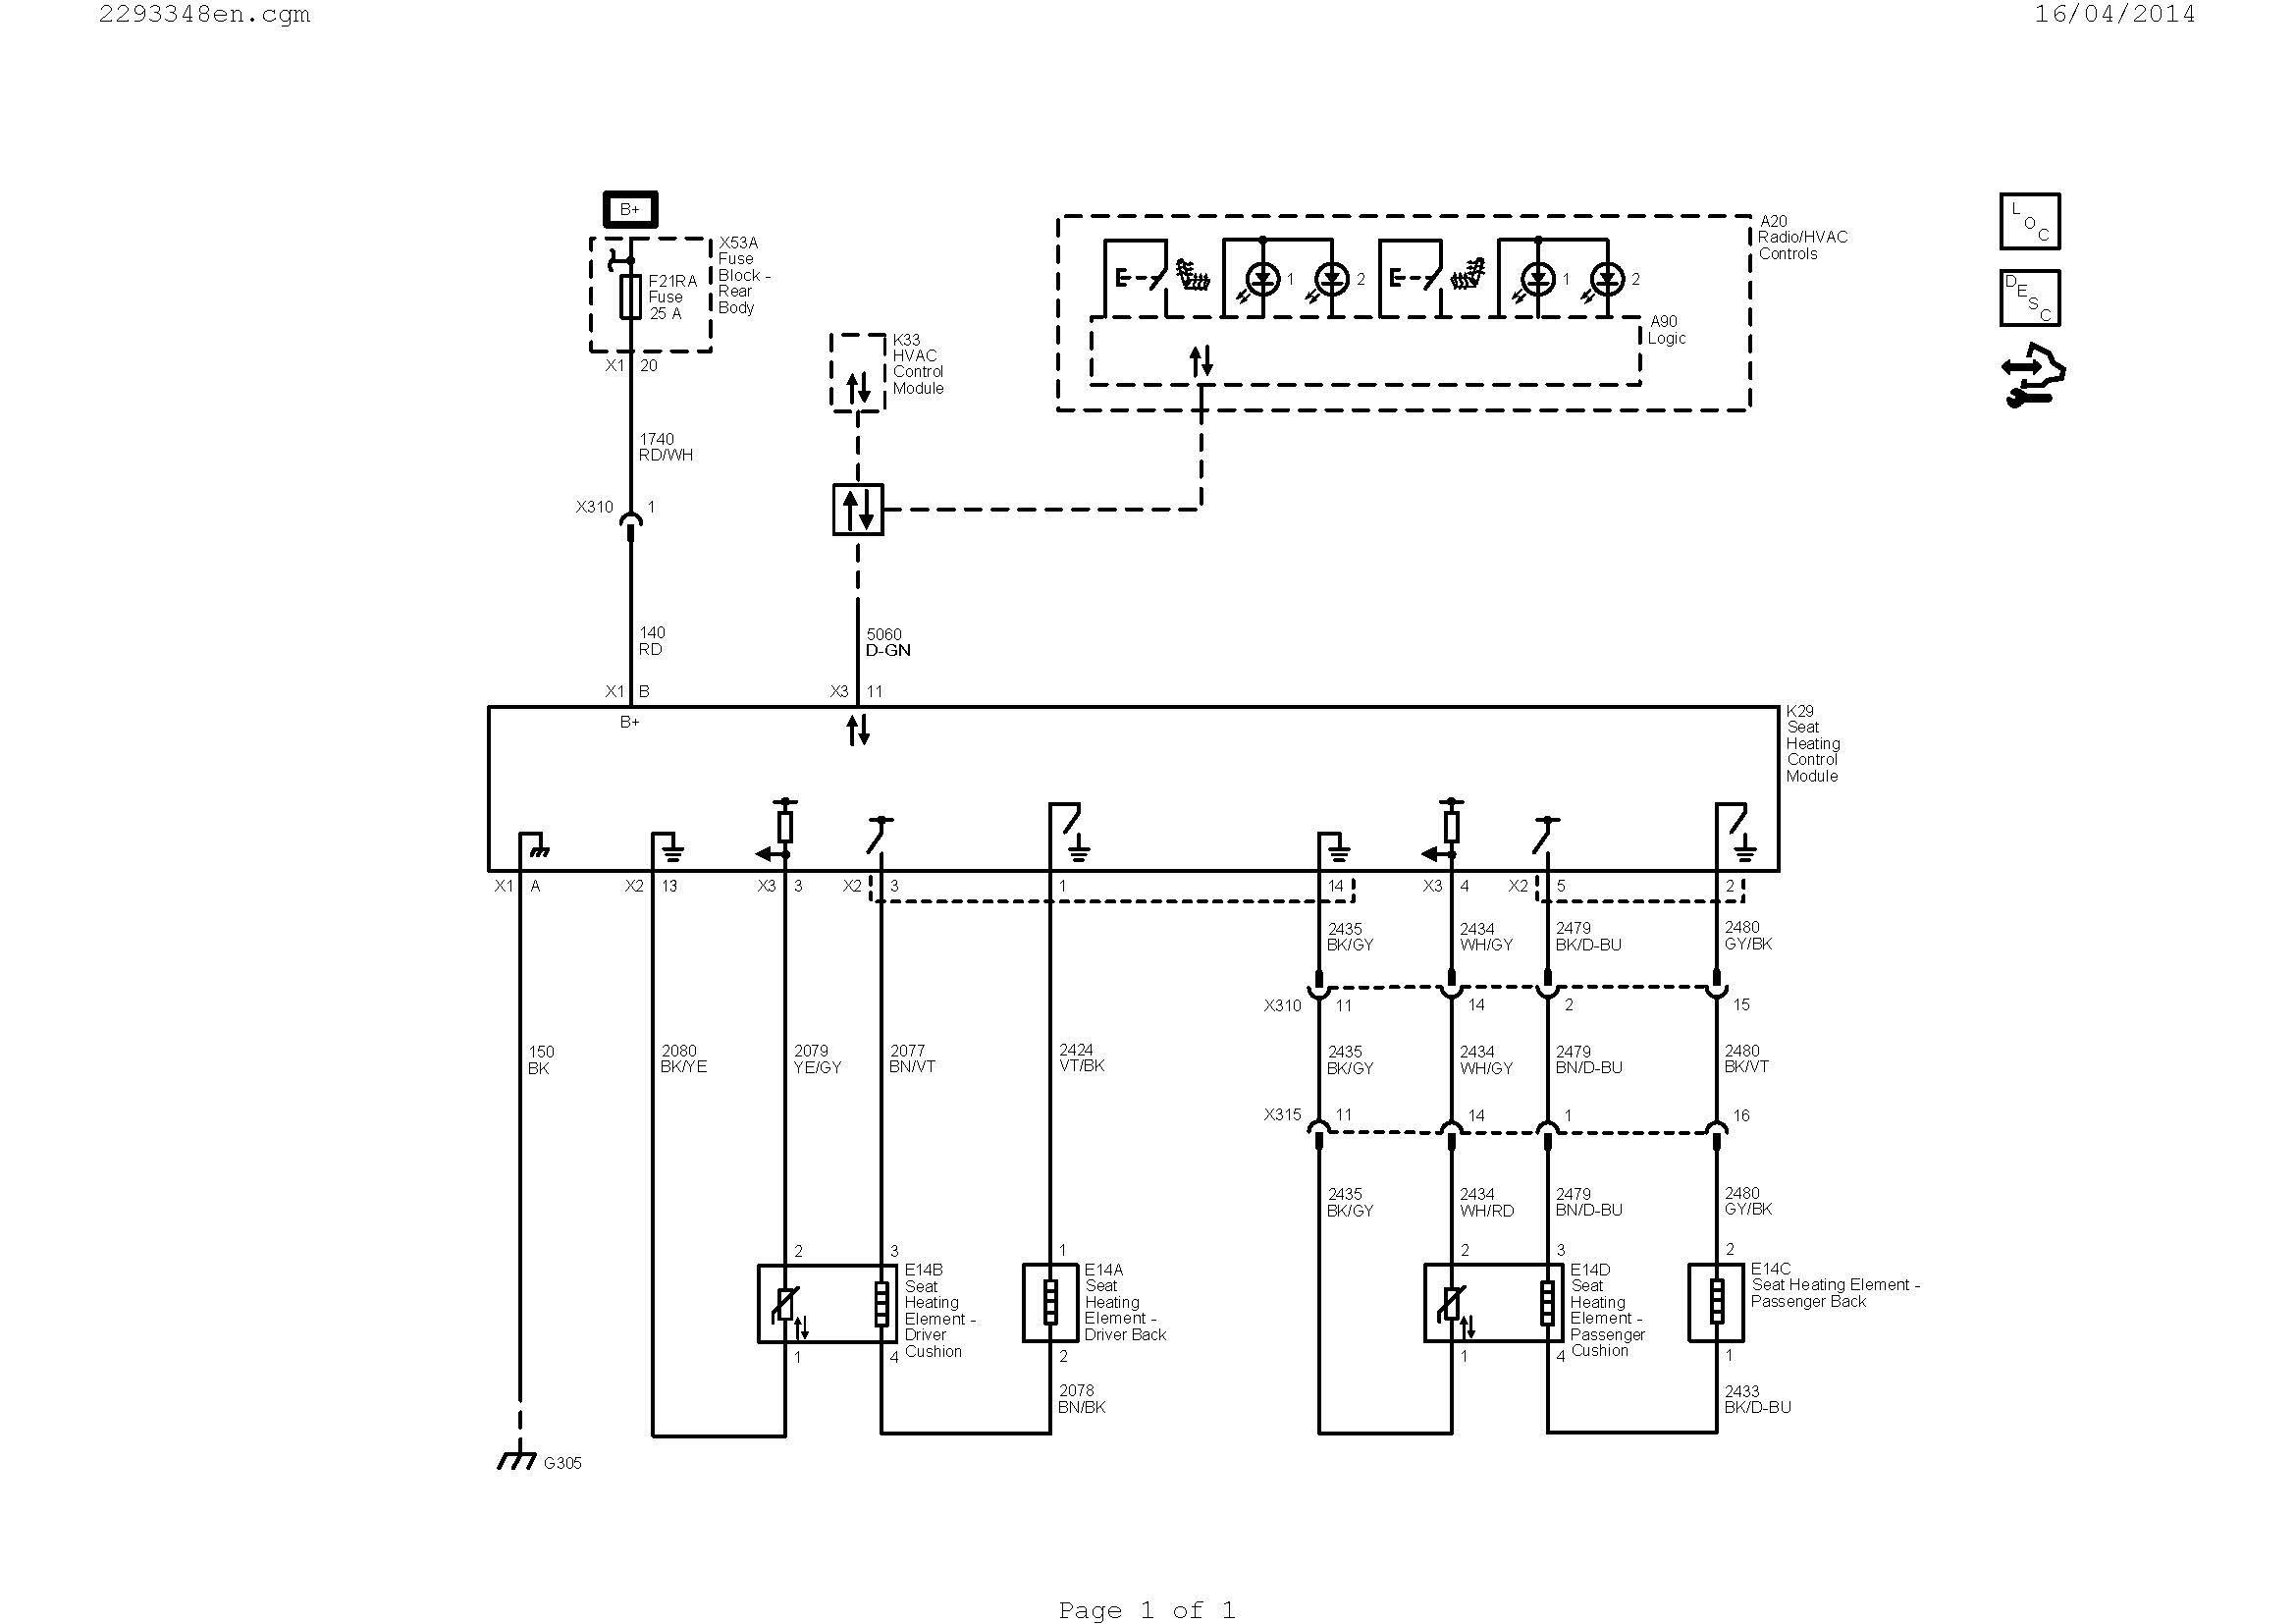 Wiring Diagrams for Electrical New Wiring Diagram Guitar Fresh Hvac Diagram Best Hvac Diagram 0d